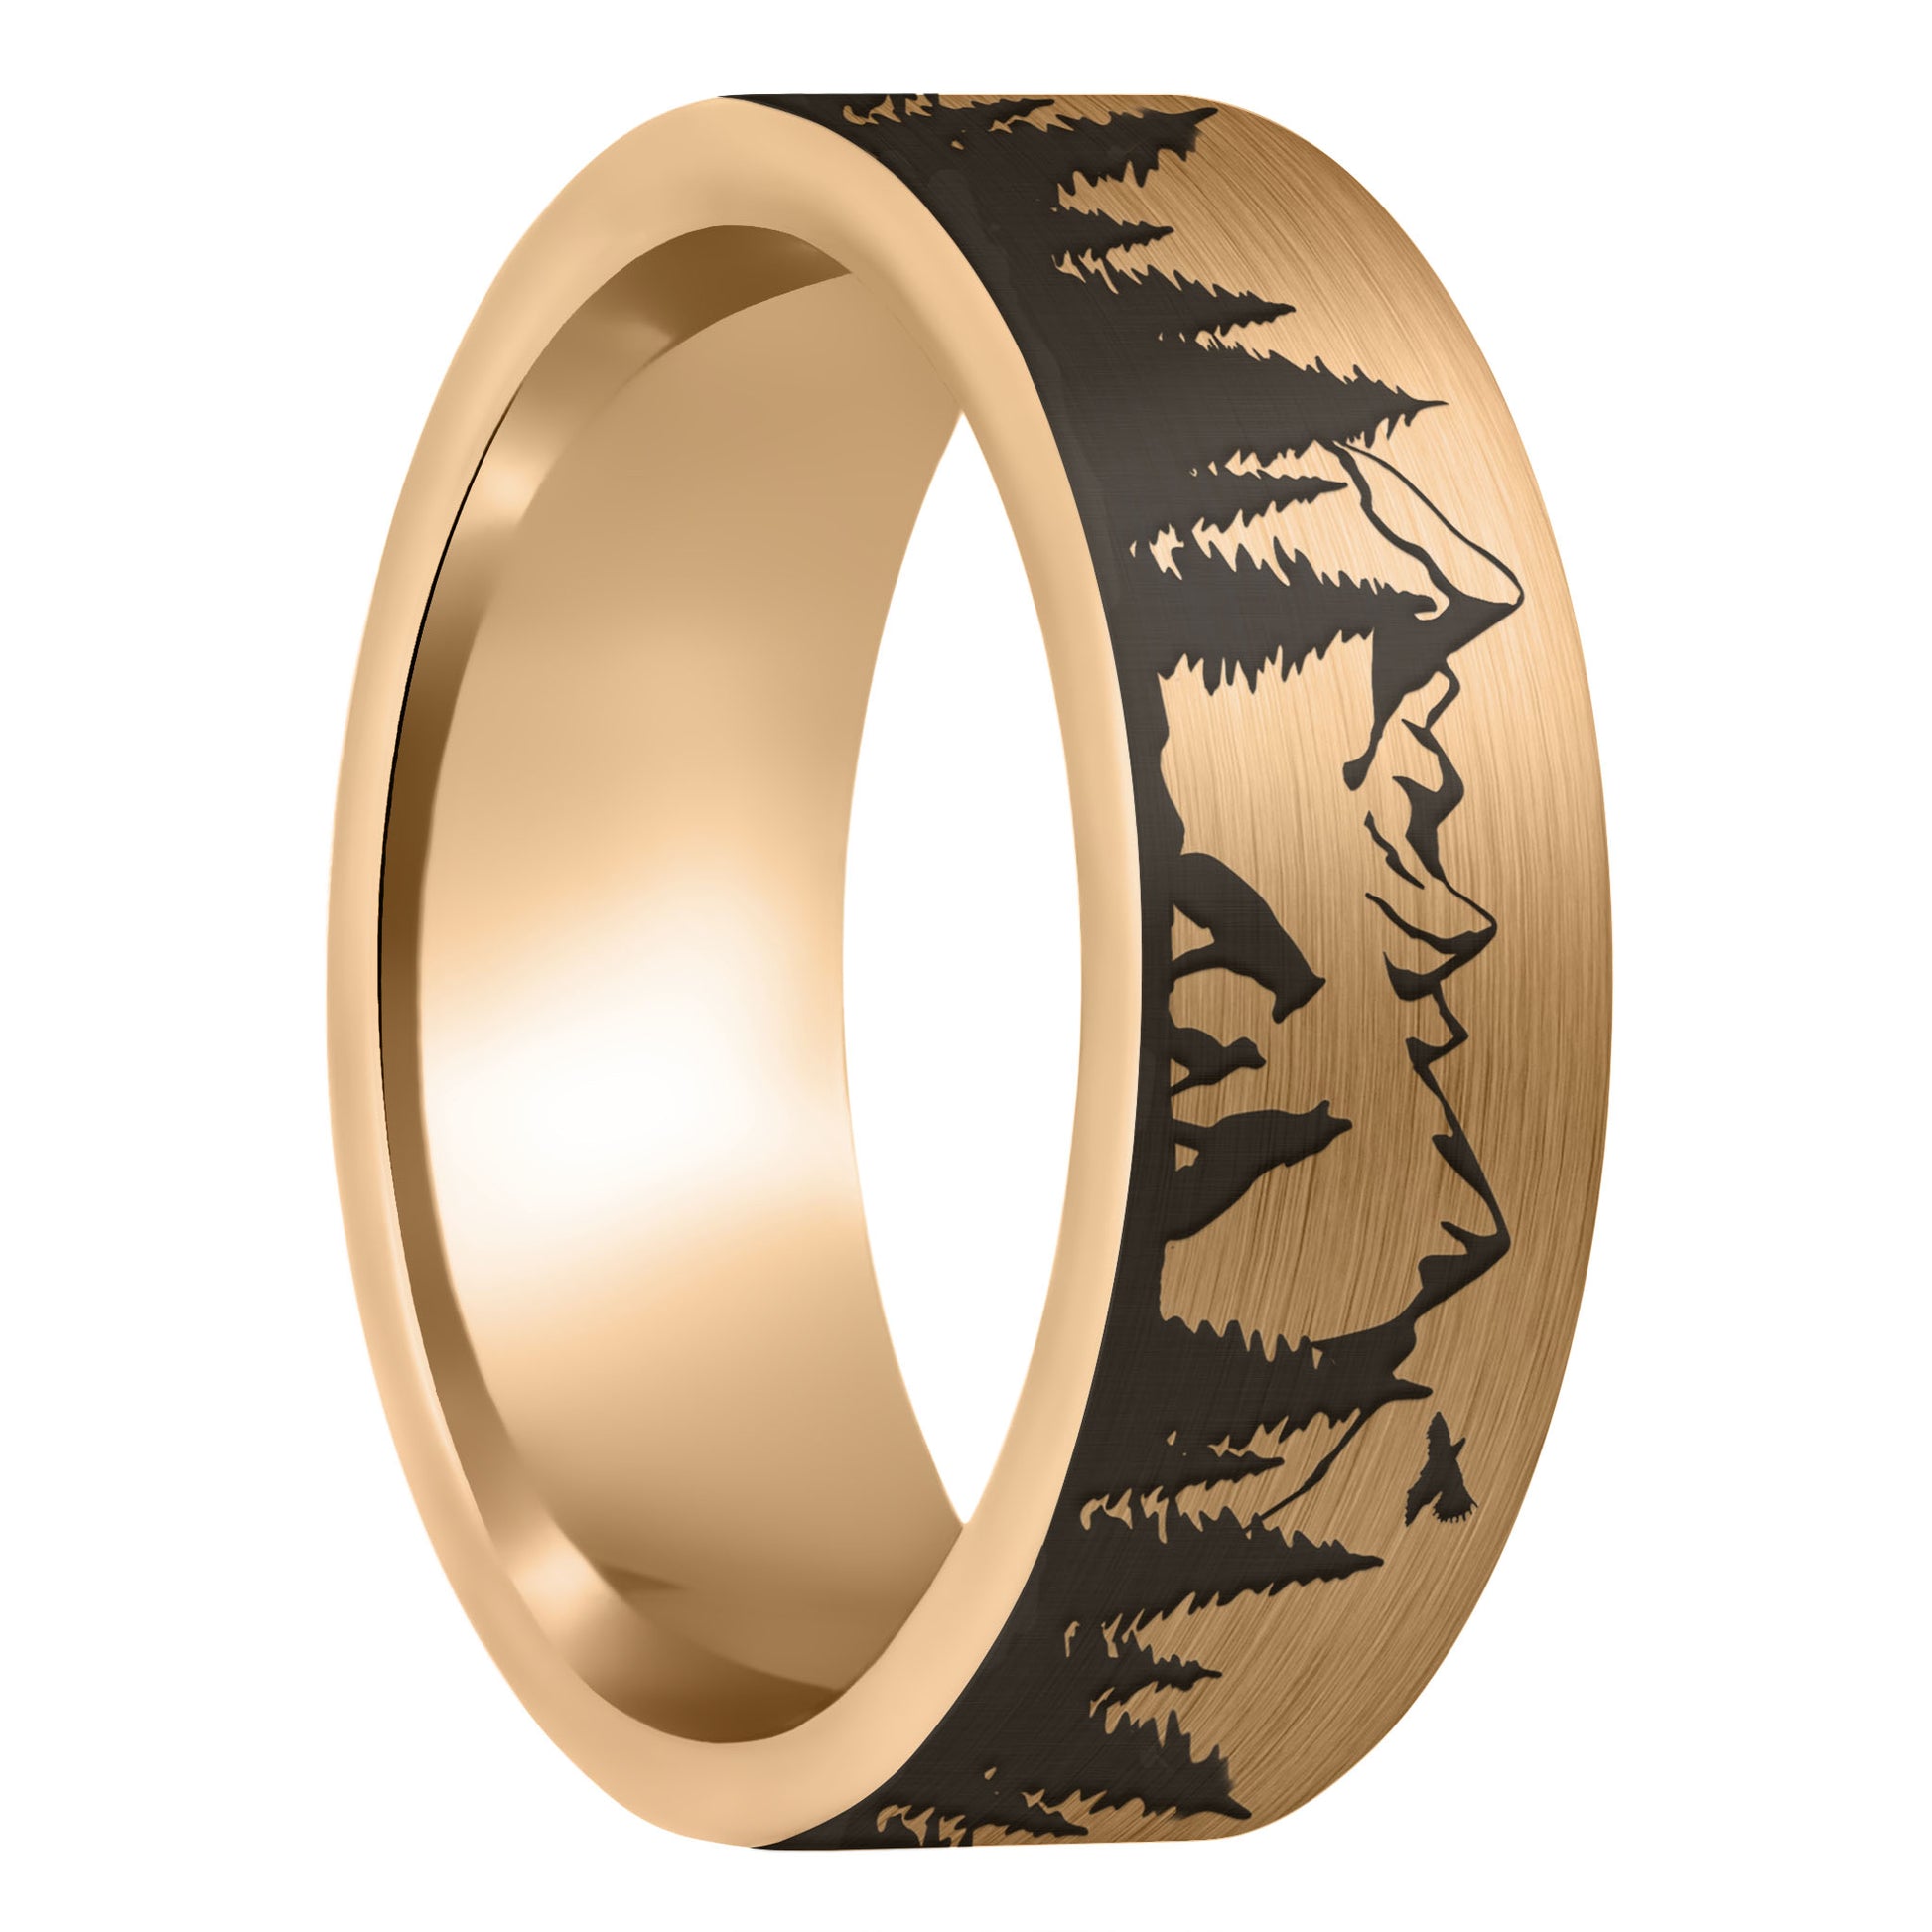 A wolf landscape scene brushed rose gold tungsten men's wedding band displayed on a plain white background.